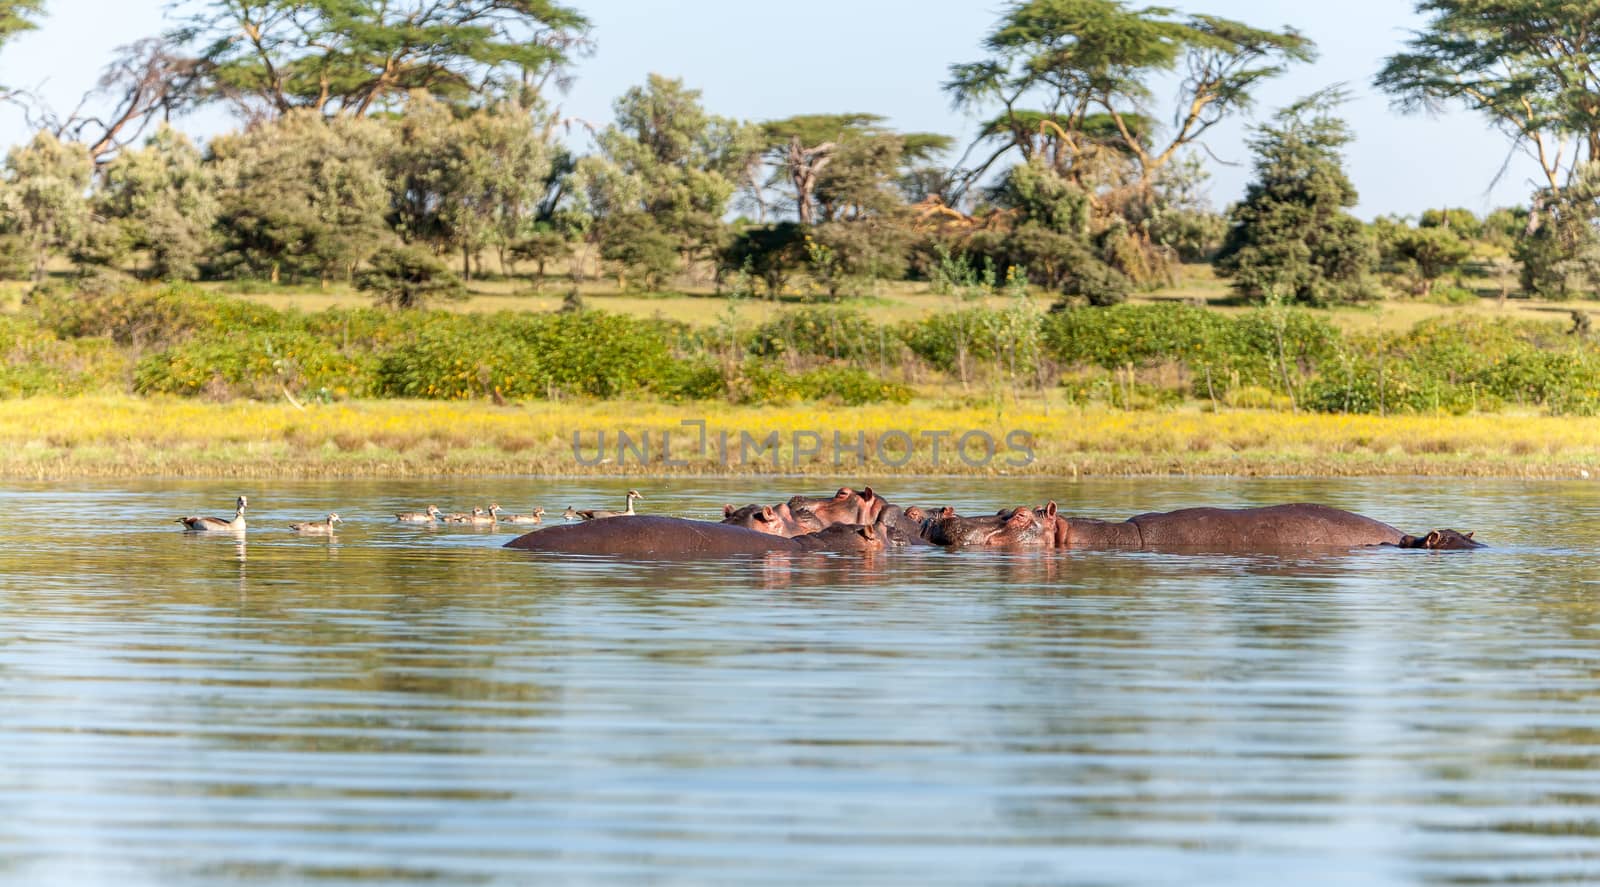 Group of hippopotamus in water, southern Africa